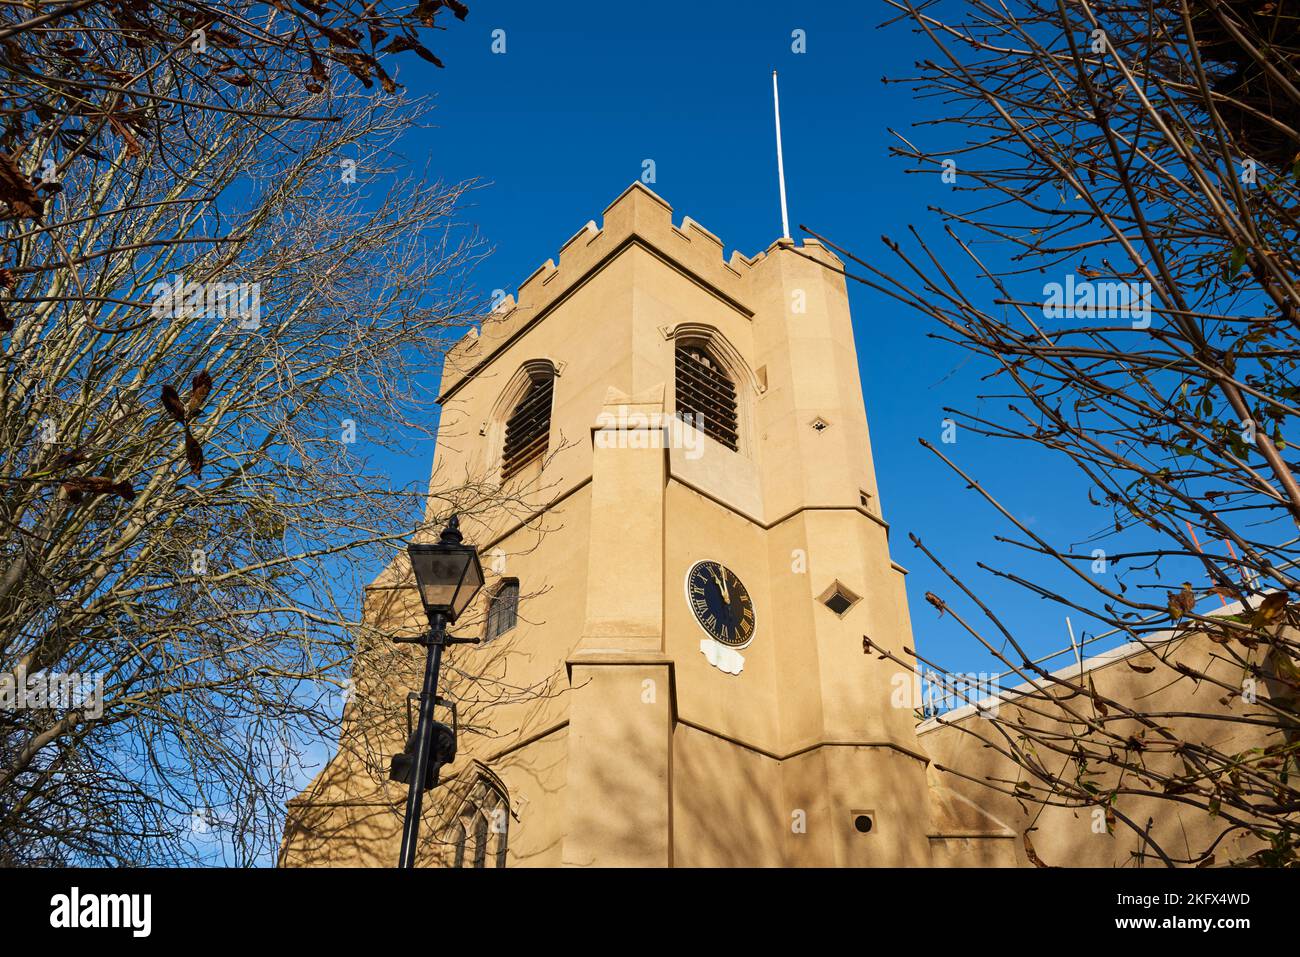 The restored 15th century tower of St Mary's church in Walthamstow village, North East London, UK Stock Photo